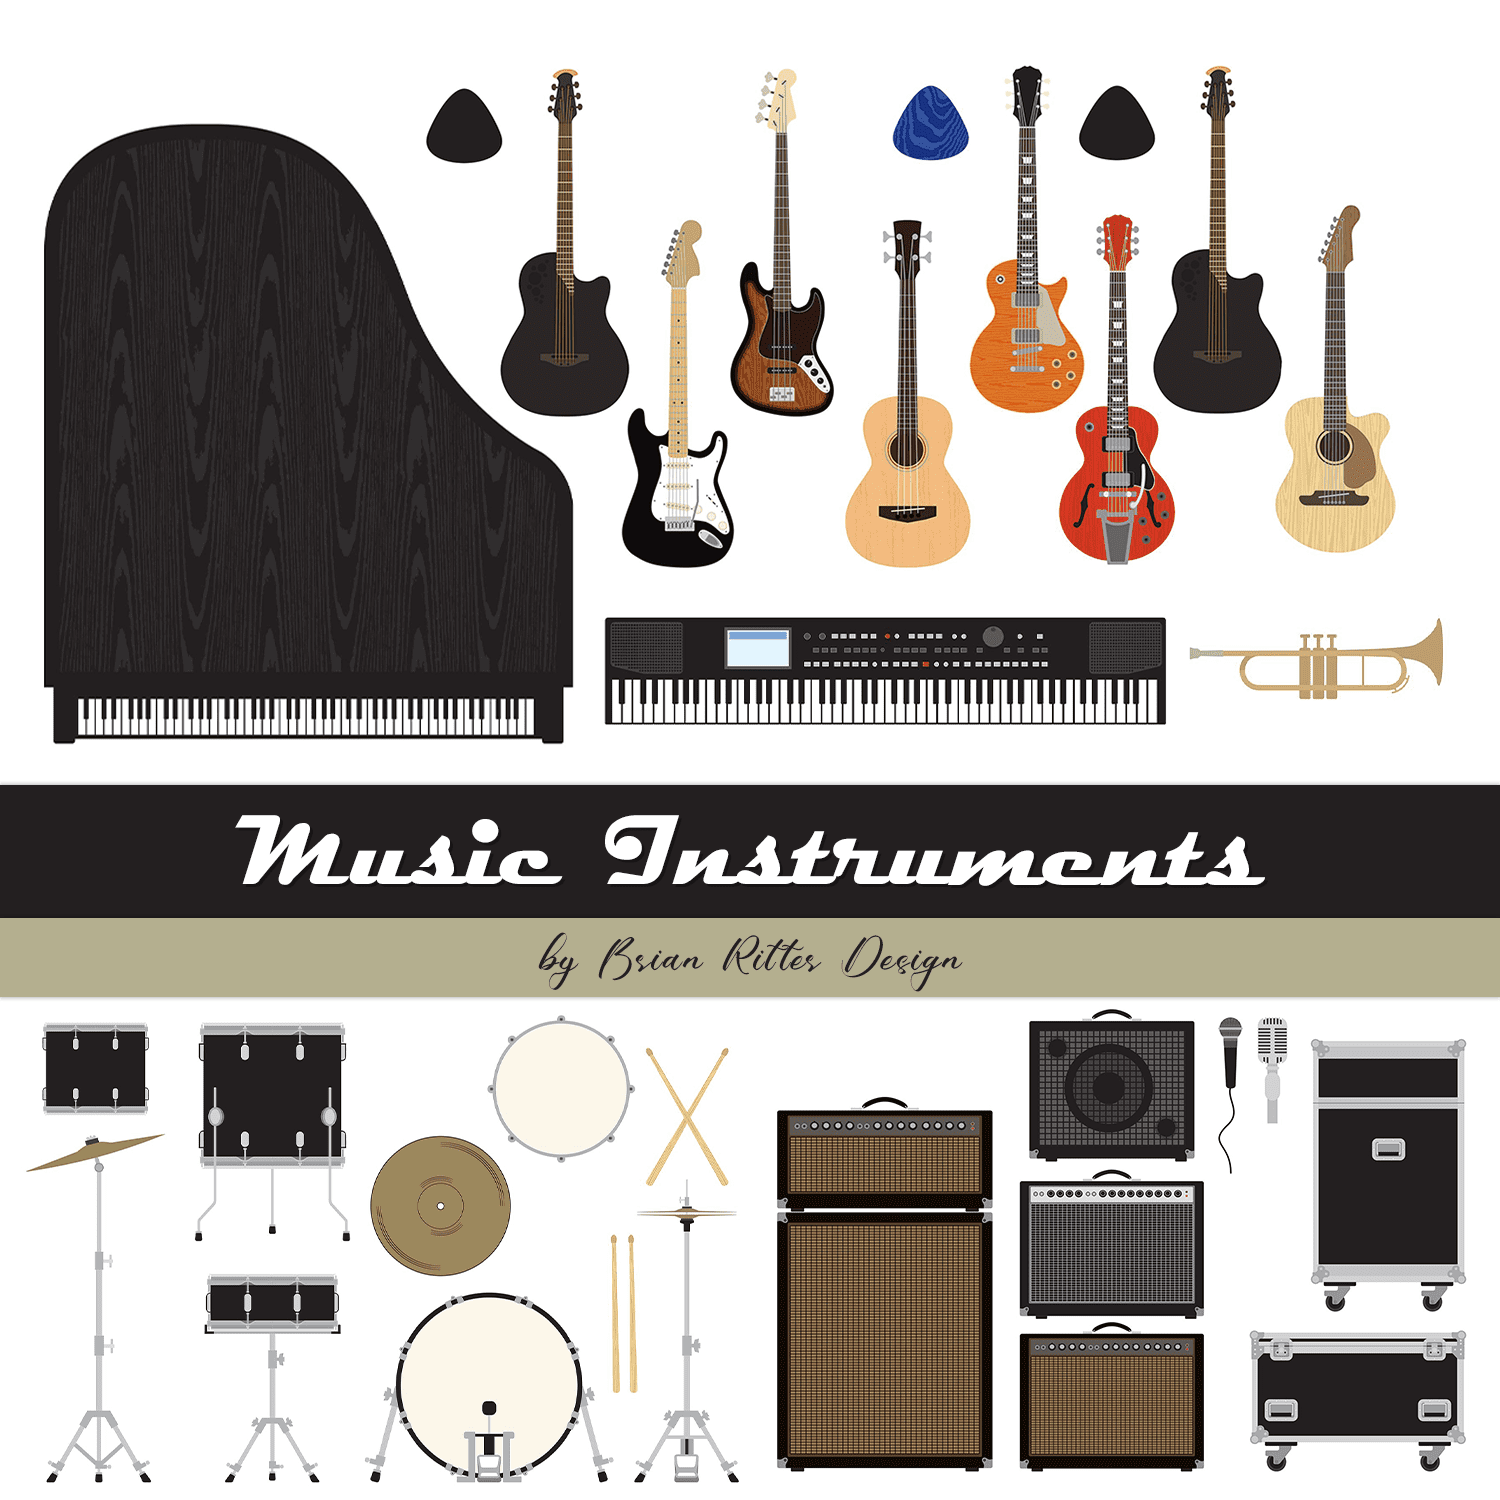 Music Instruments cover.